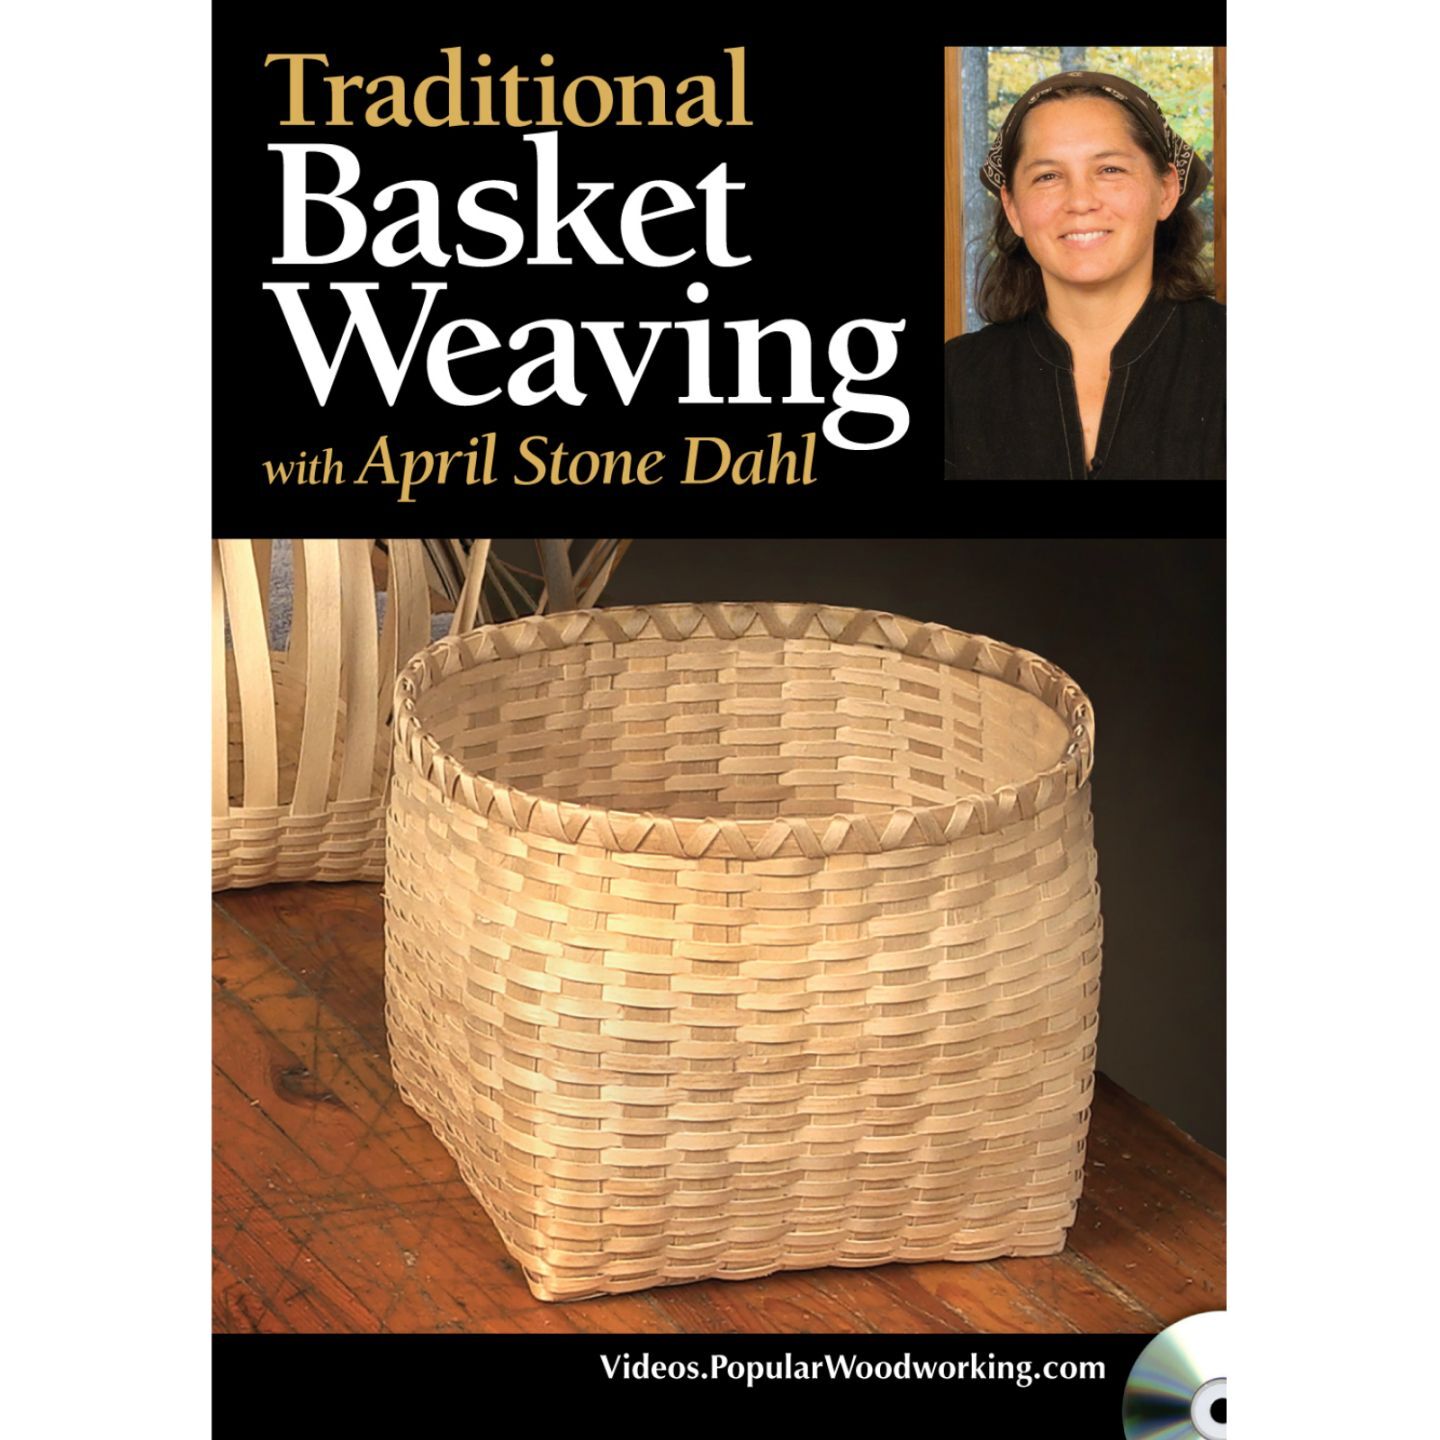 Traditional Basket Weaving with April Stone Dahl (DVD)